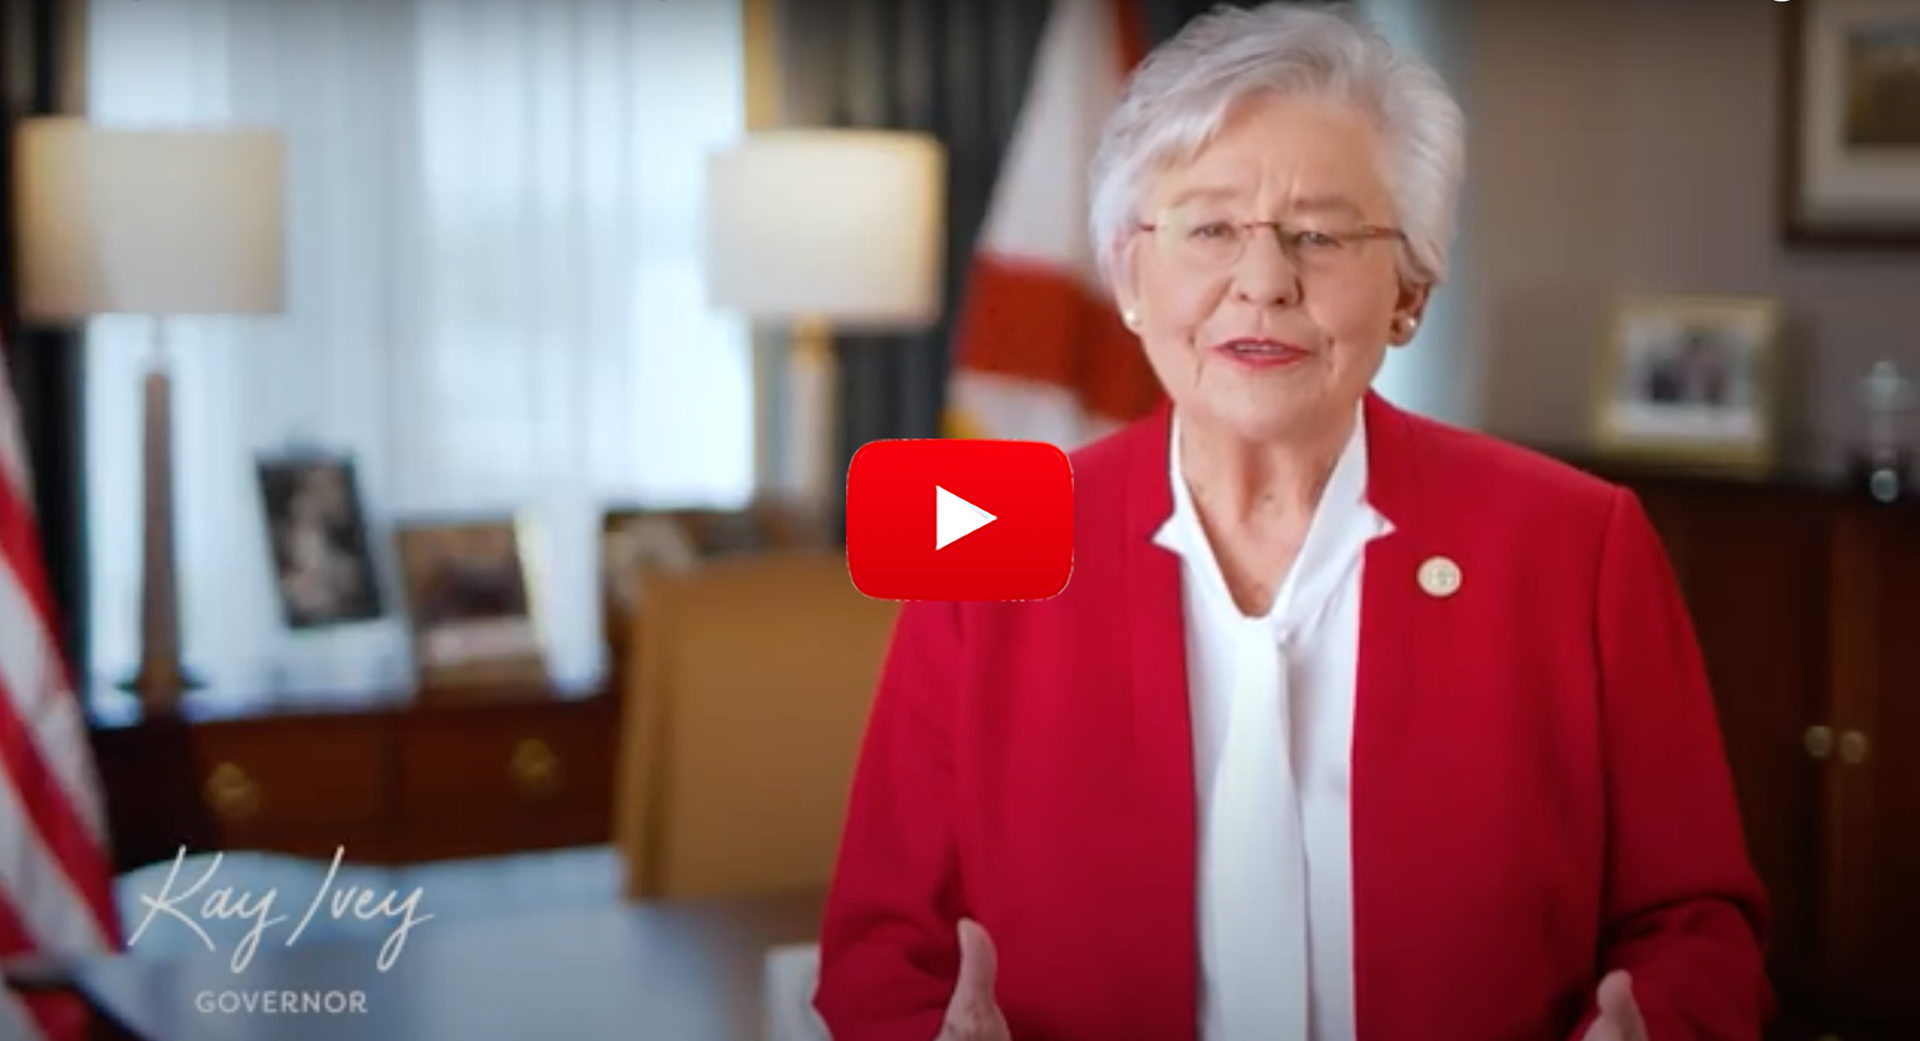 Kay Ivey for Governor